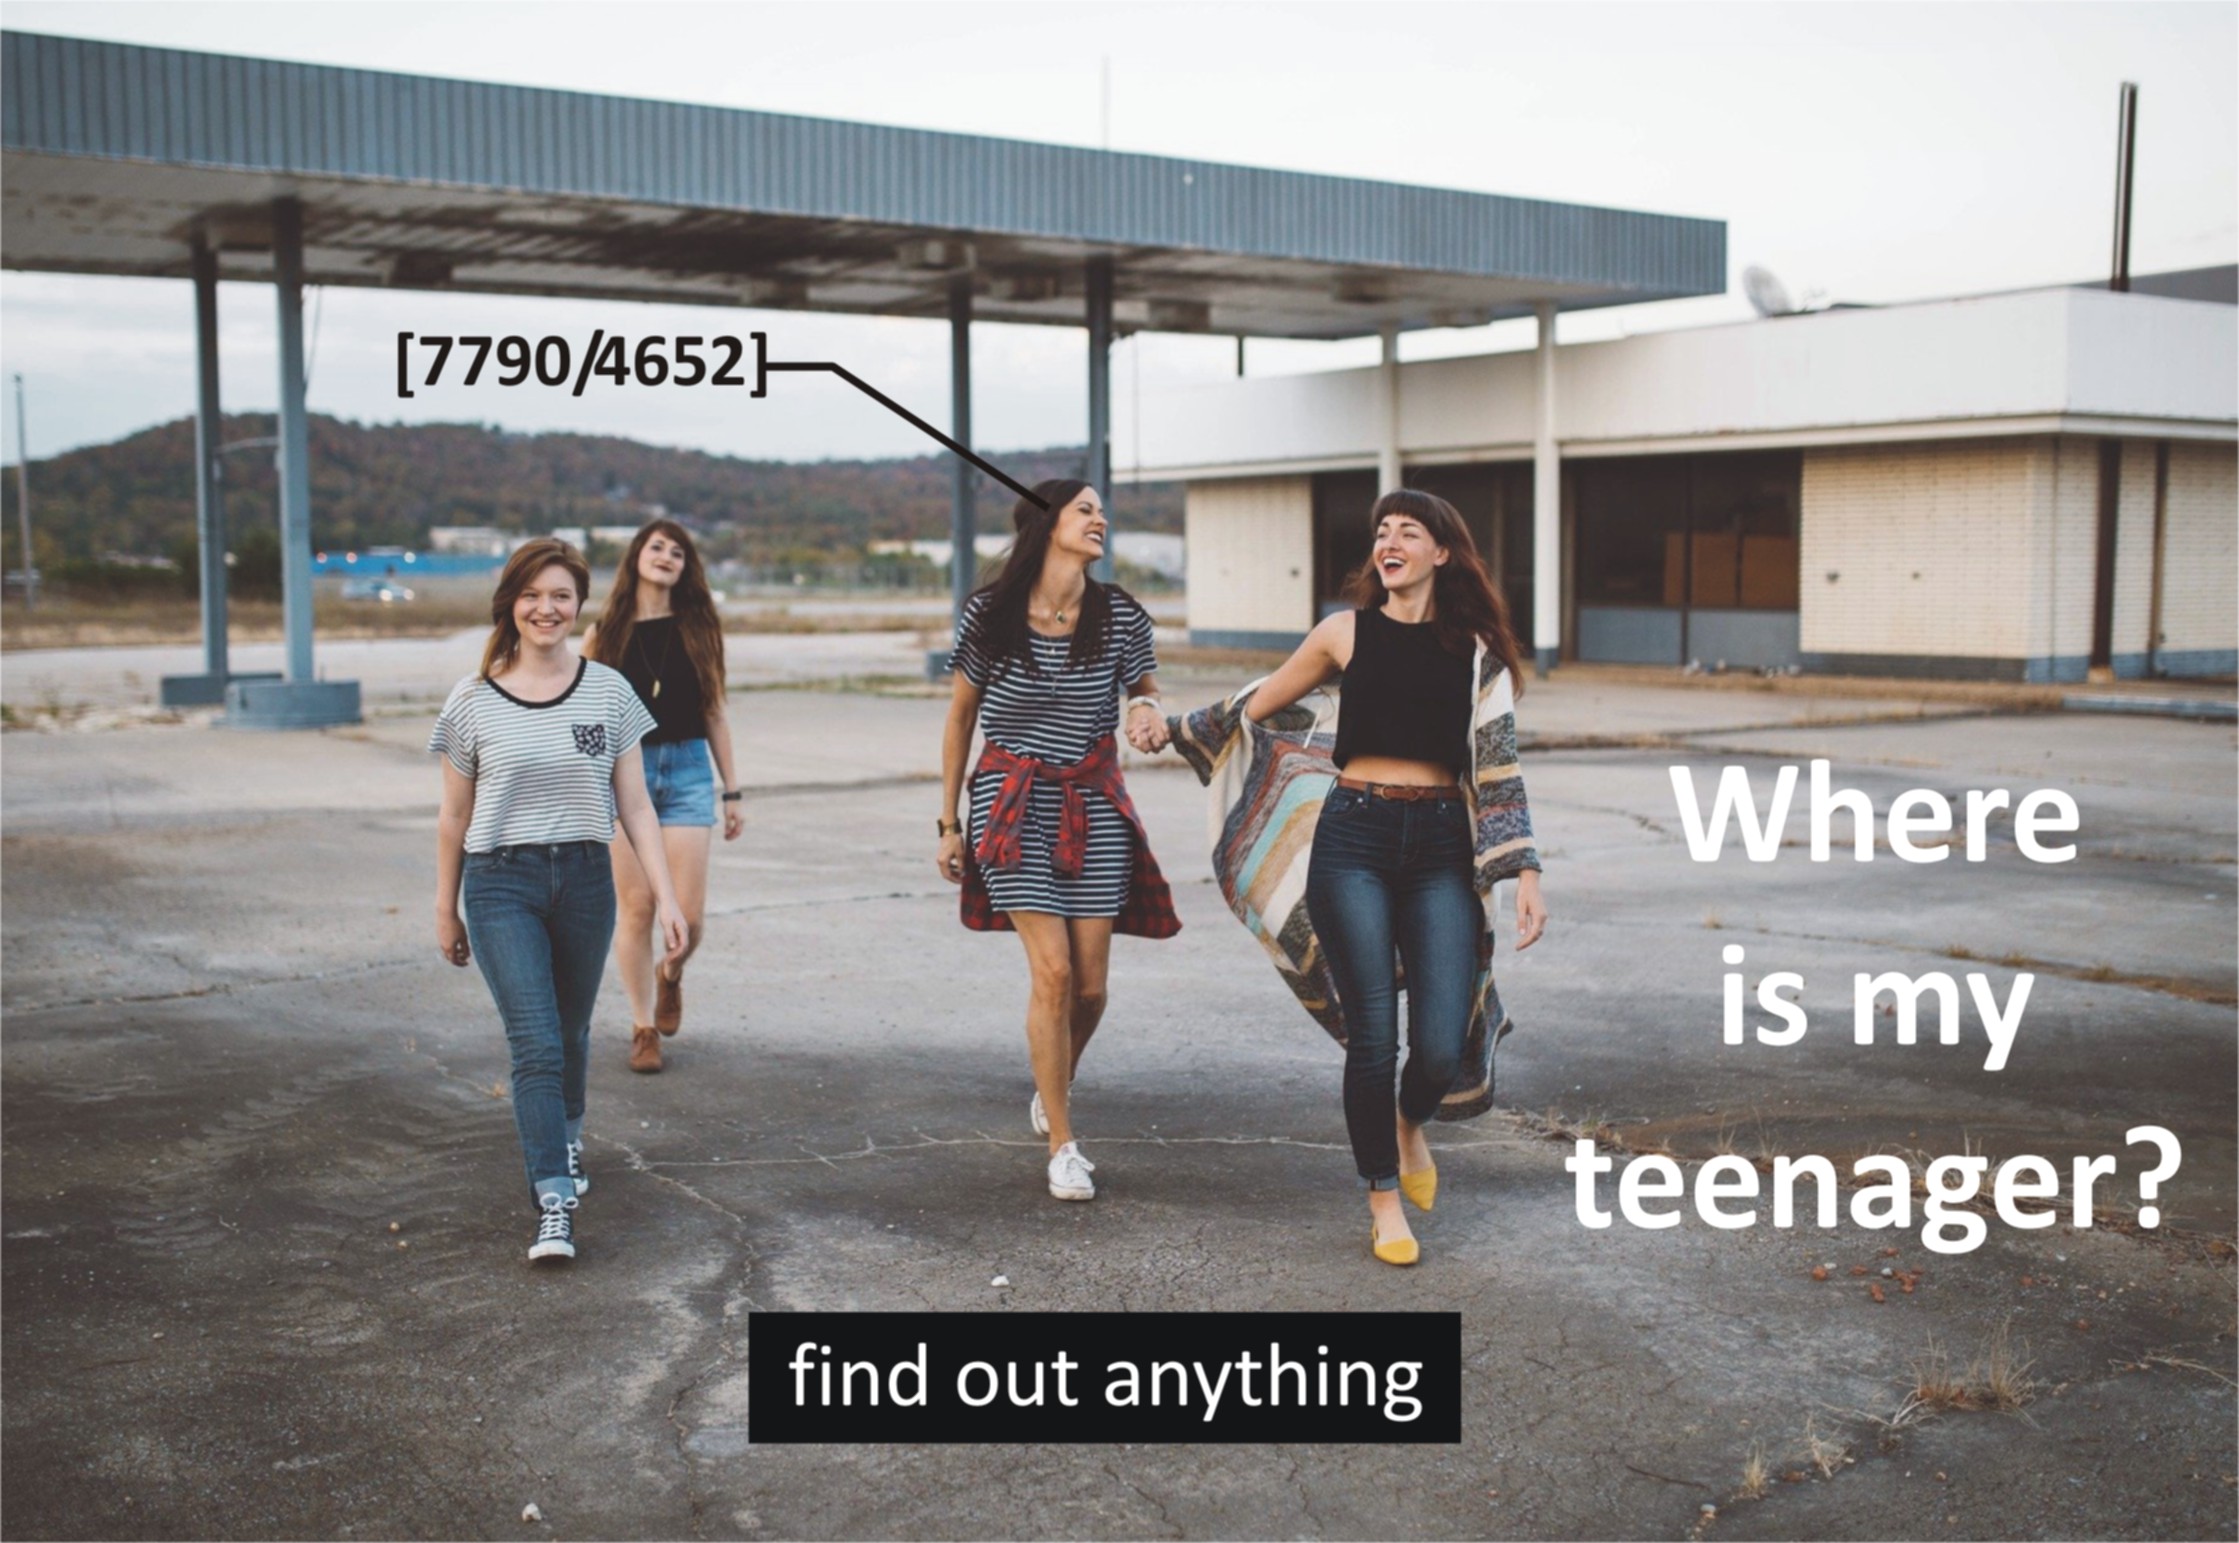 Where is my teenager?